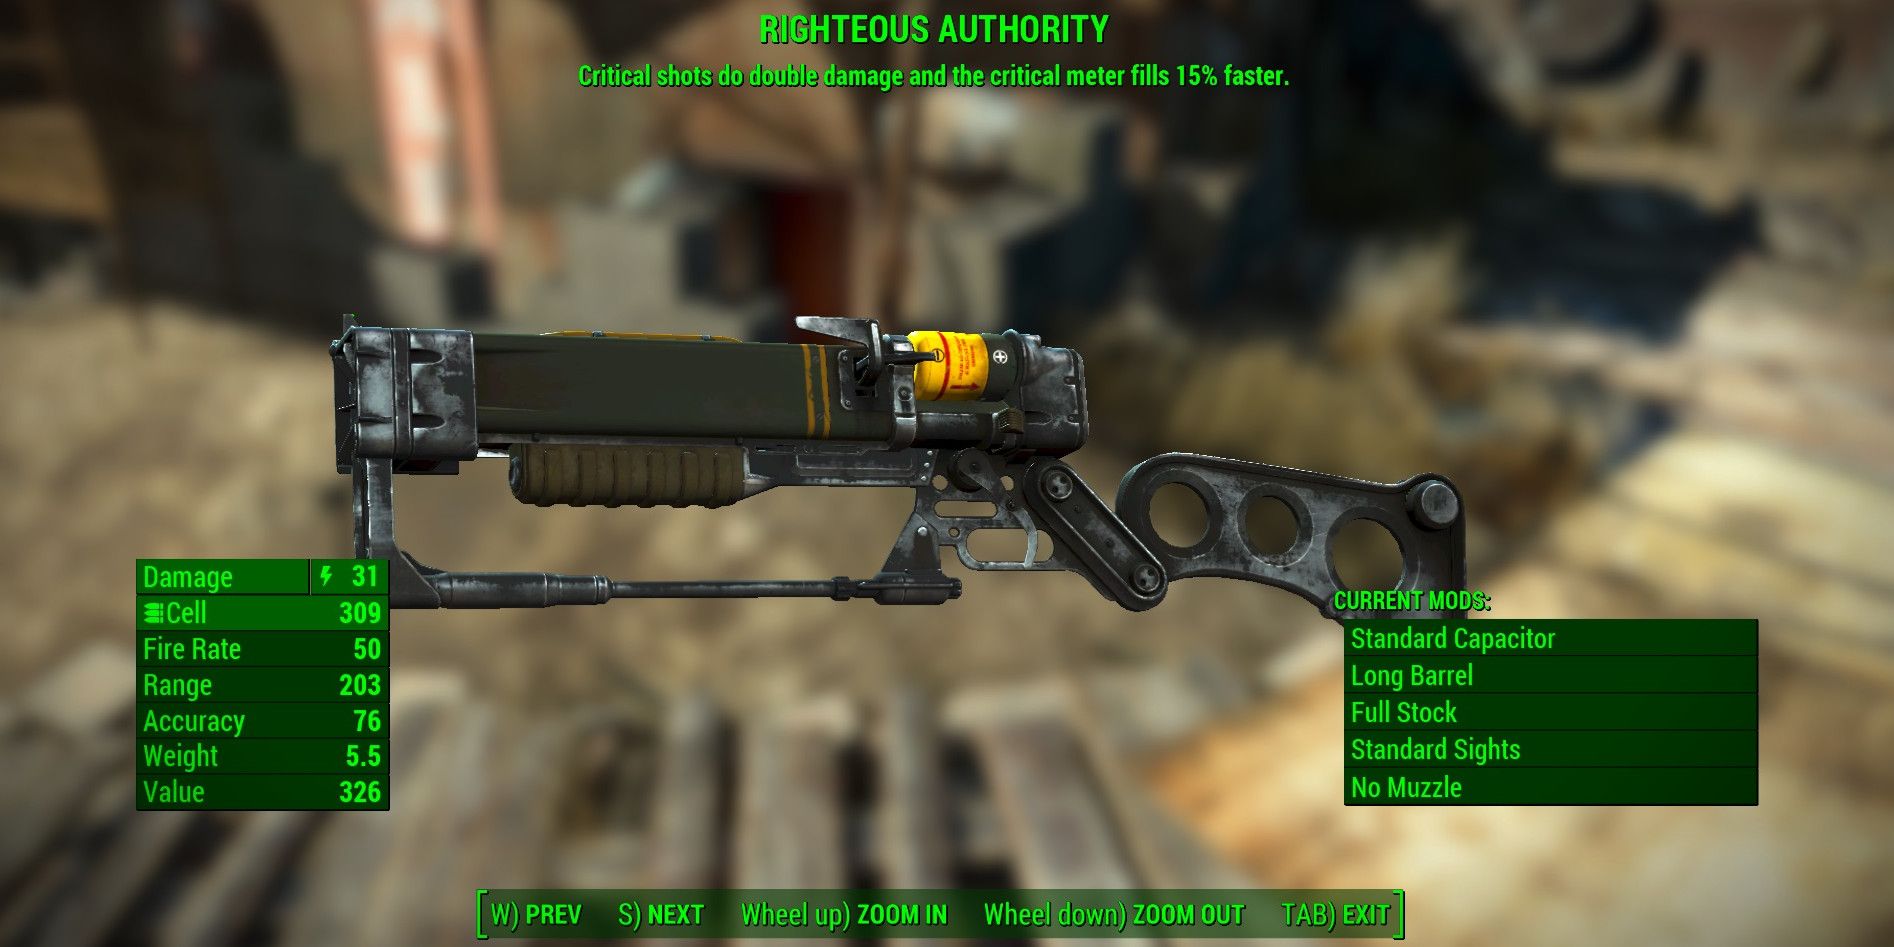 righteous authority in the ingame customisation menu